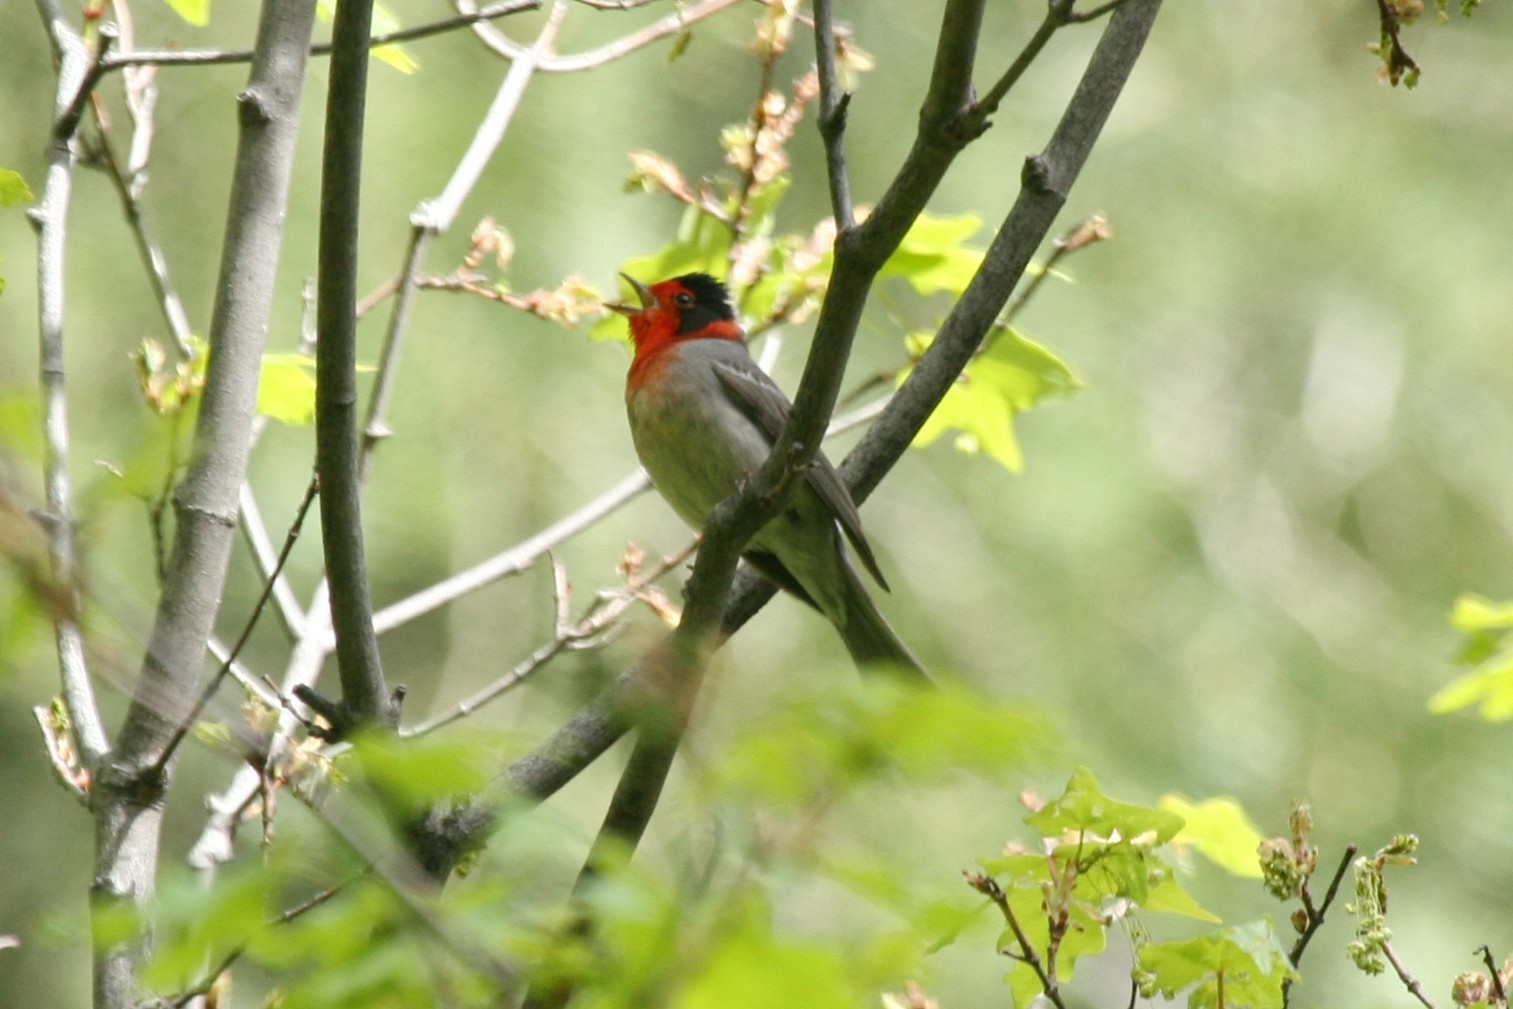 Red-faced Warblers (Cardellina)